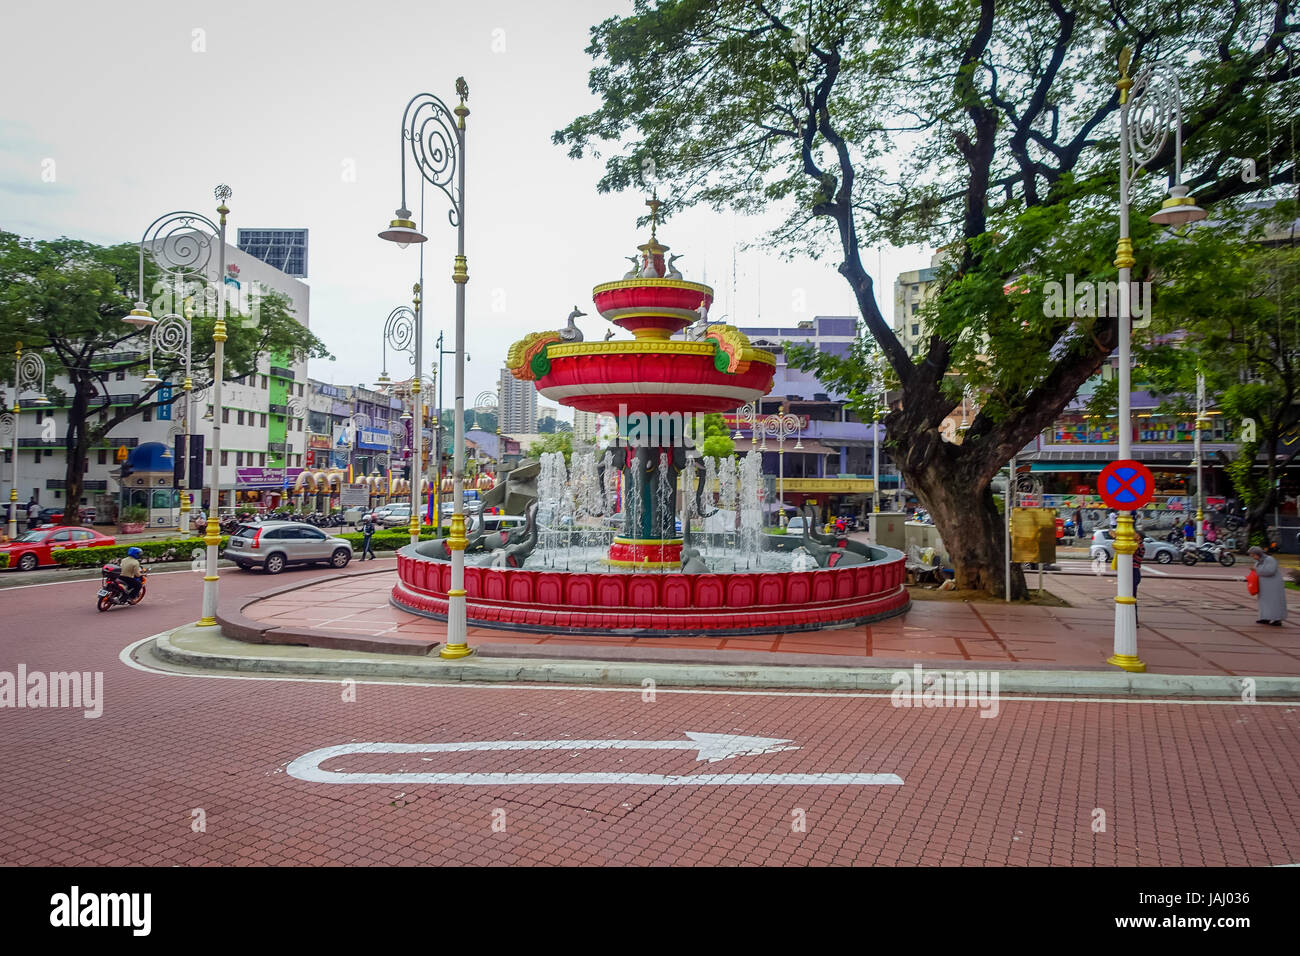 Kuala Lumpur, Malaysia - March 9, 2017: Ganesh elphant water fountain in Little India neighborhood, recently transformed into a wide street with Indian stores and restaurants. Stock Photo